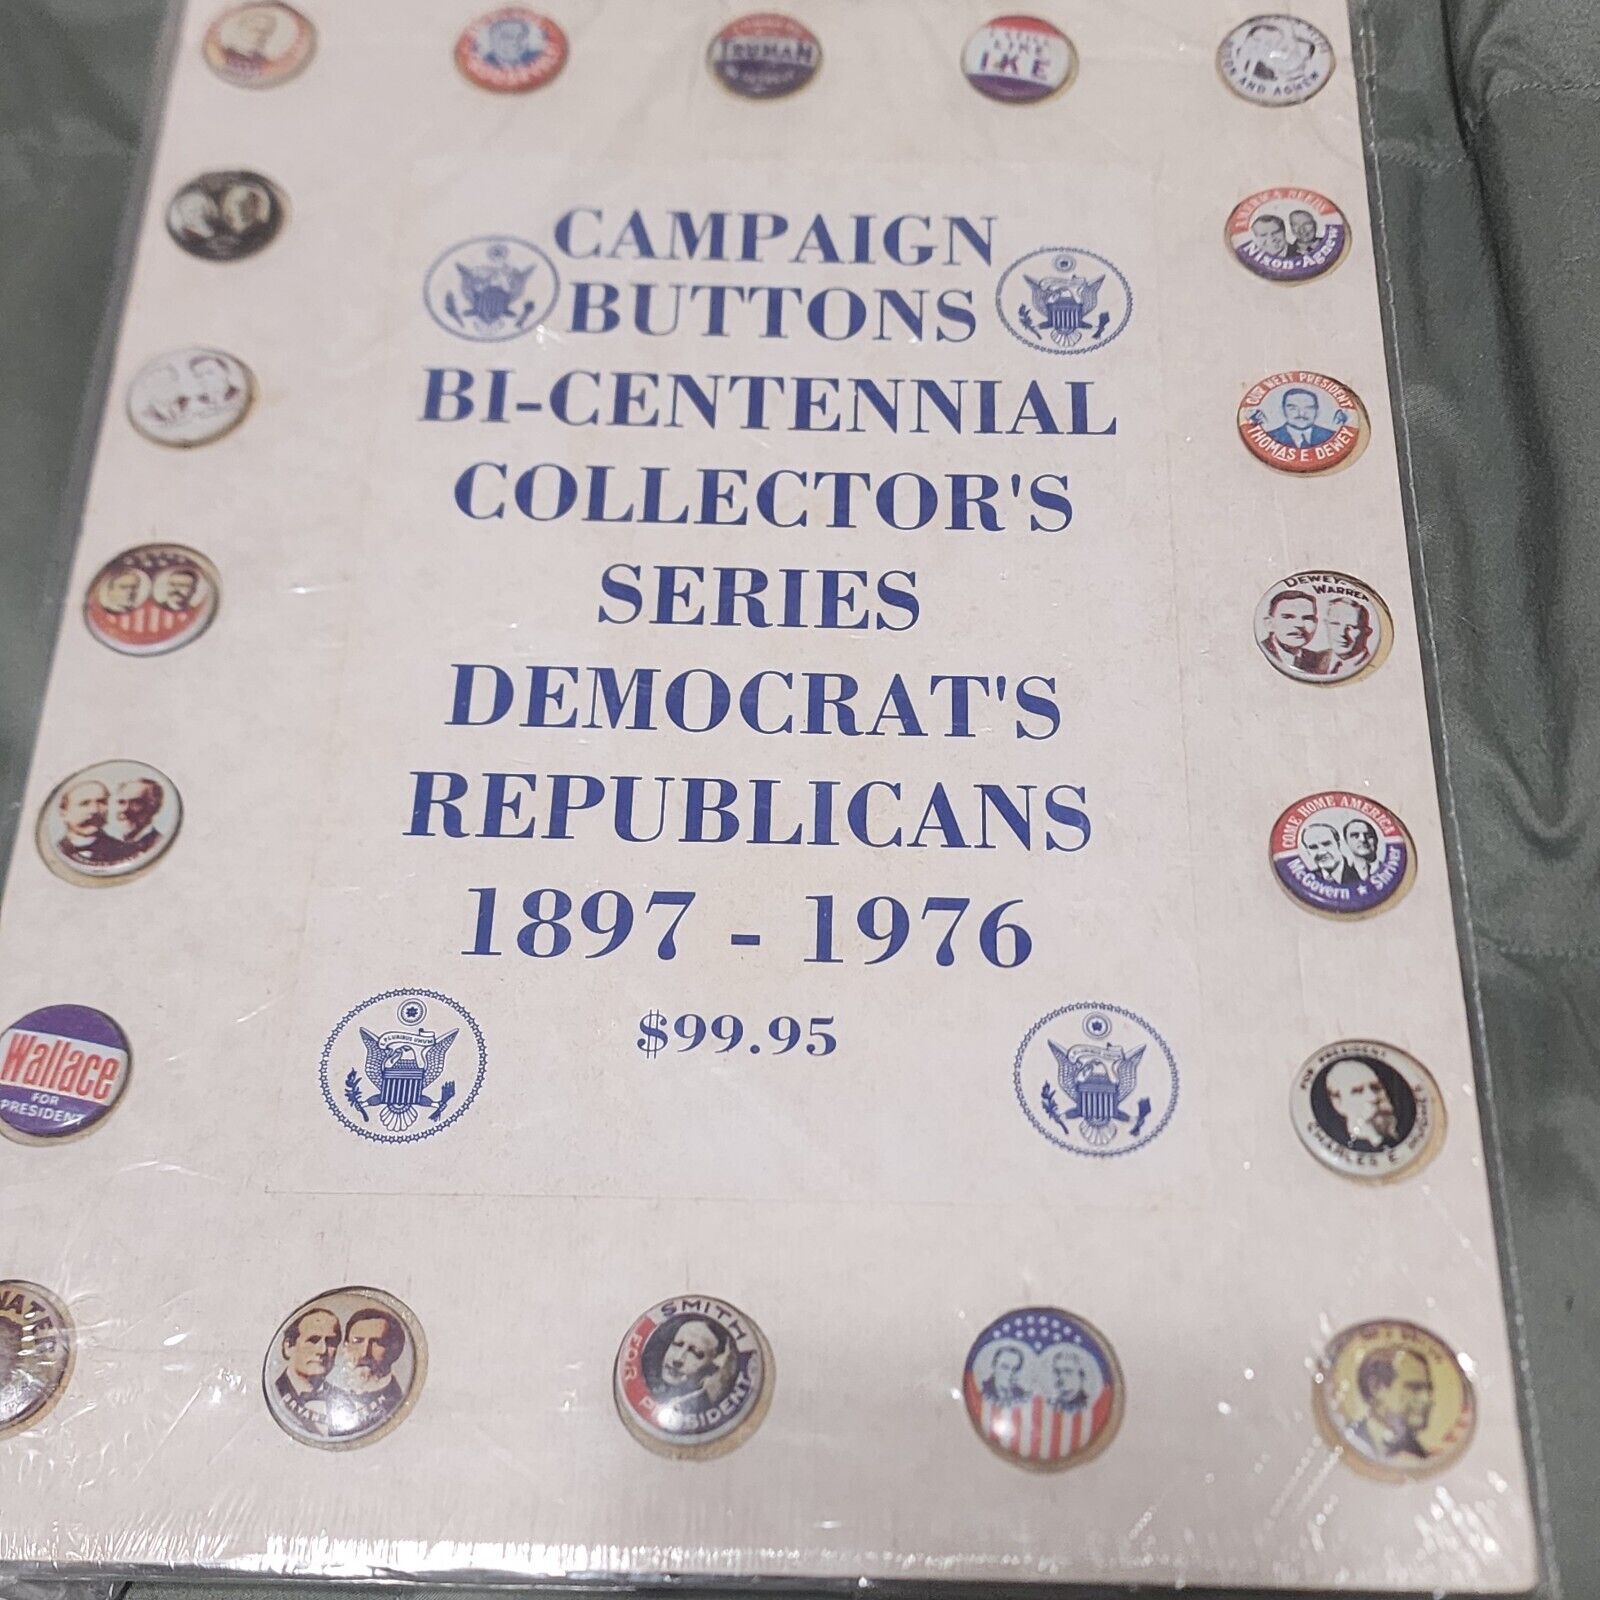 Vintage Campain Buttons Bi-Centennial 3 Collector’s Series Boards Lot 1897-1976 